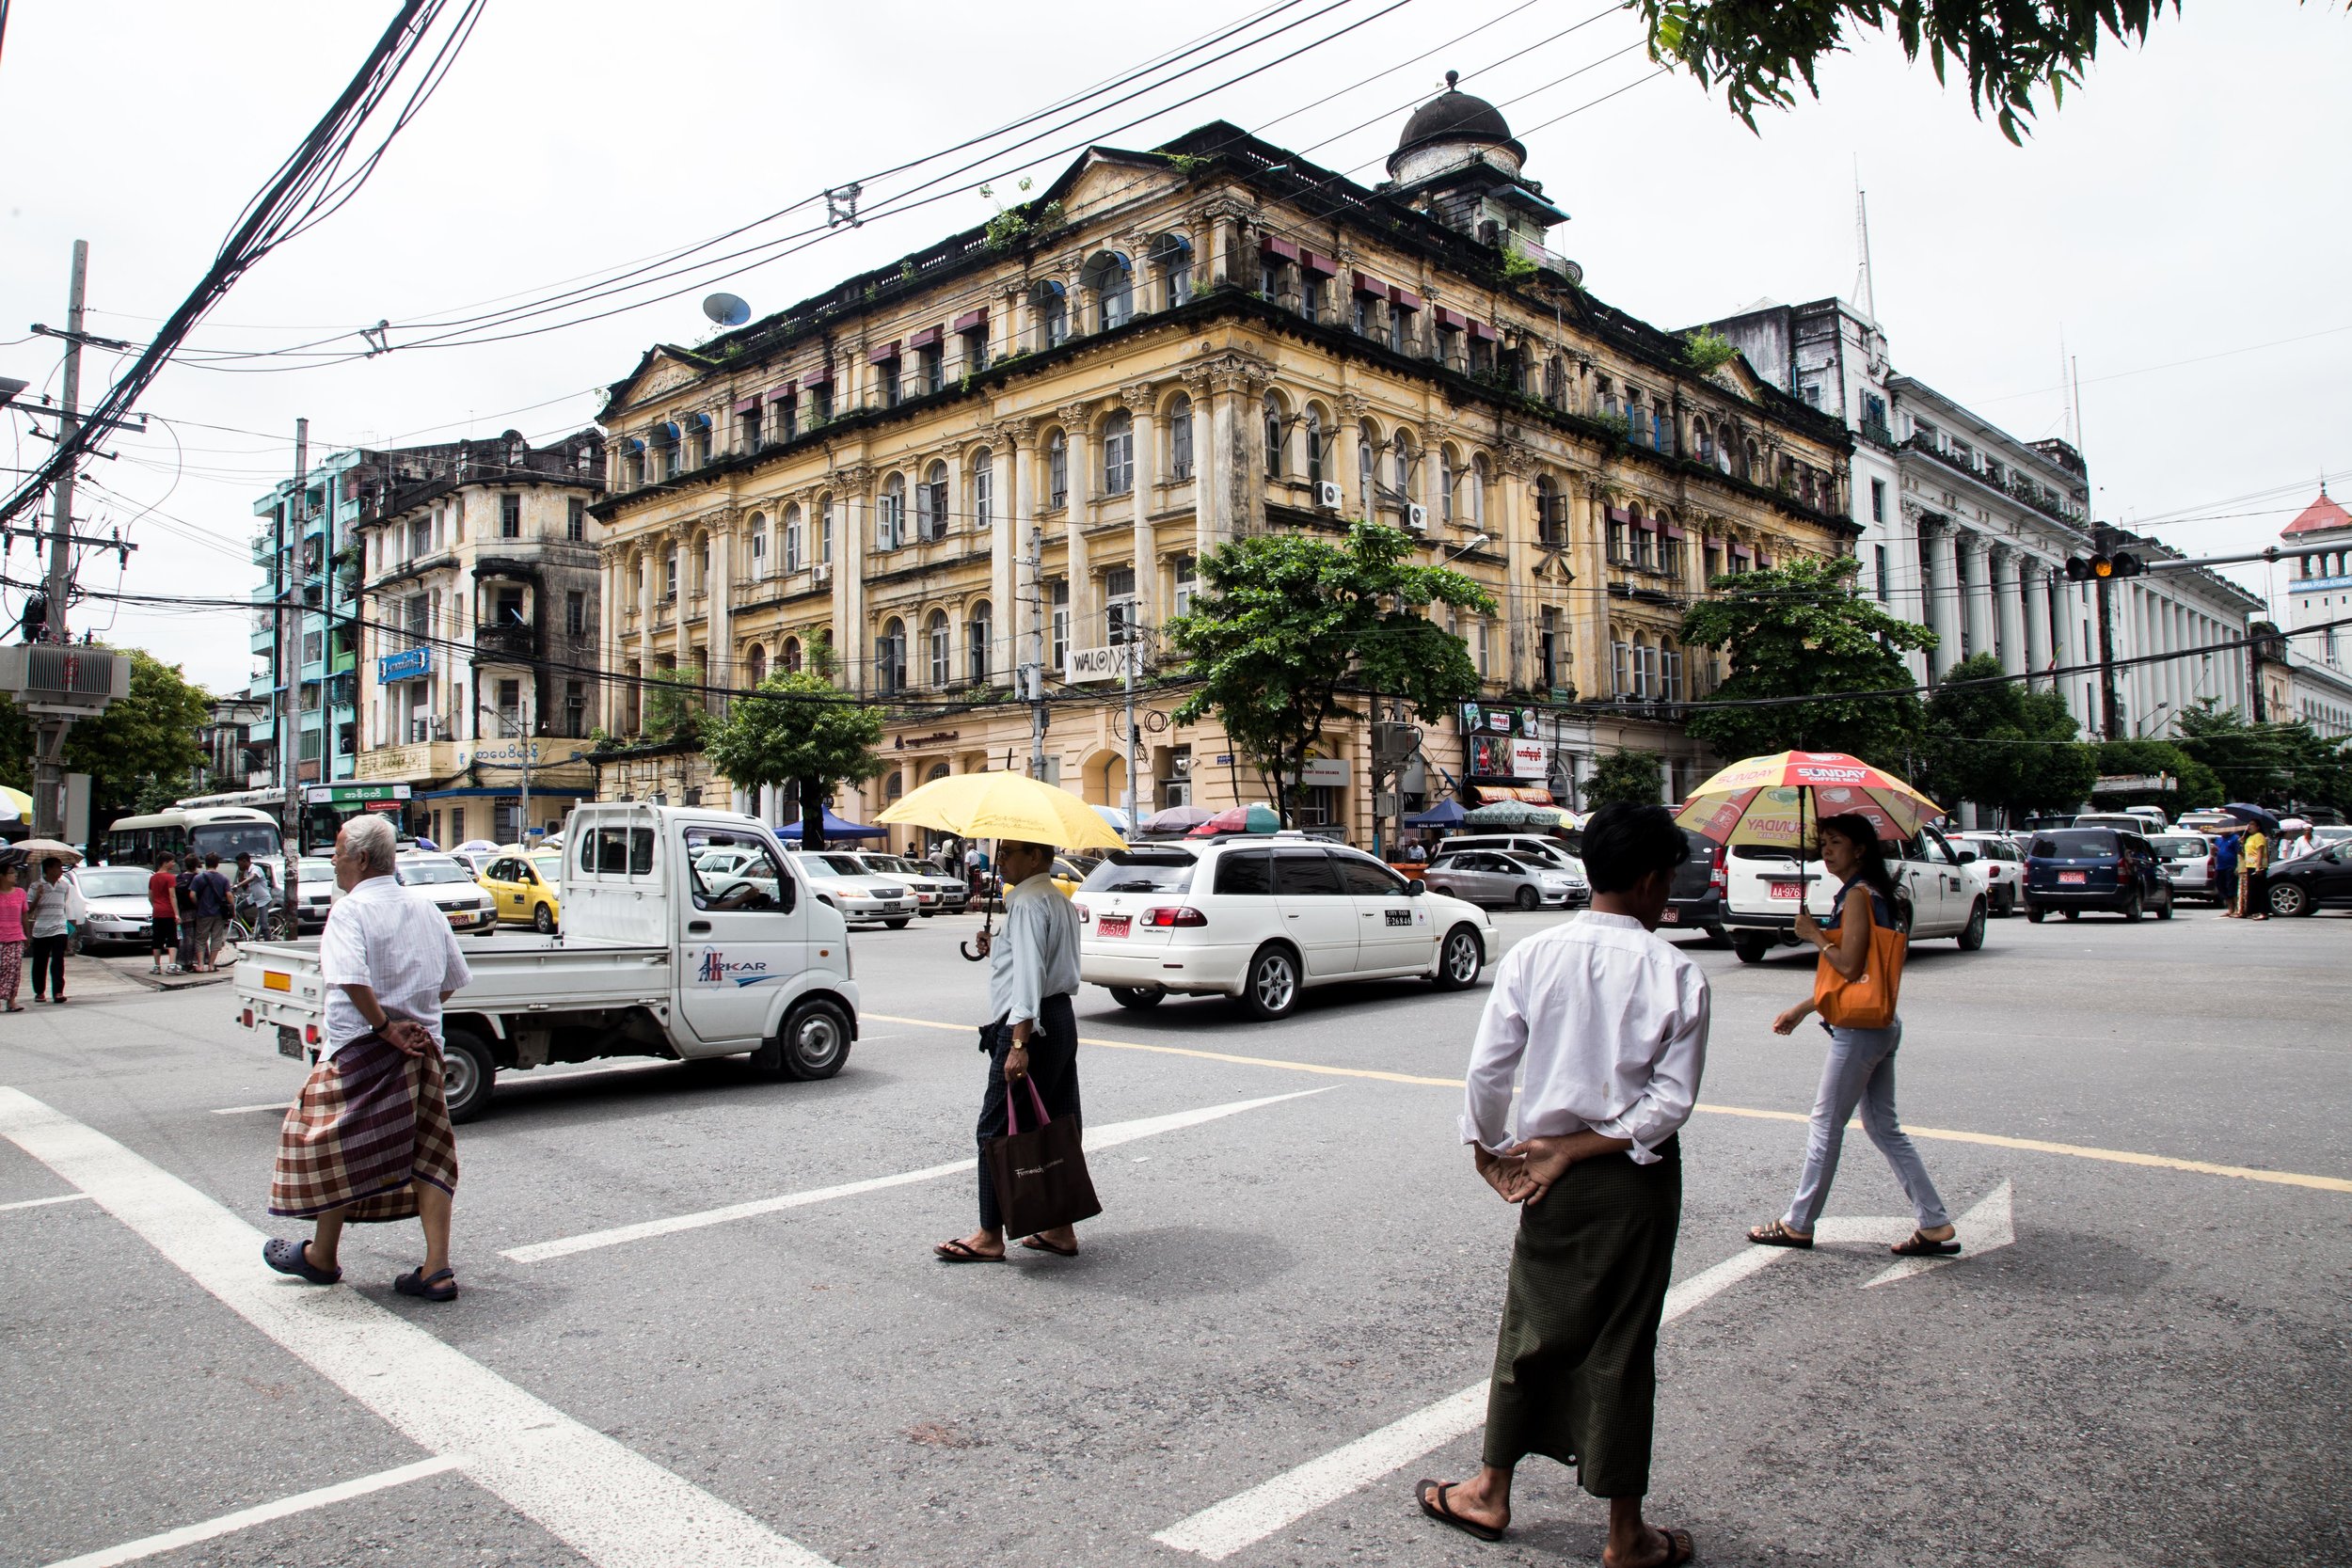  The century old Sofaer & Co building in downtown Yangon, Myanmar in 2015. Photo by Ann Wang 